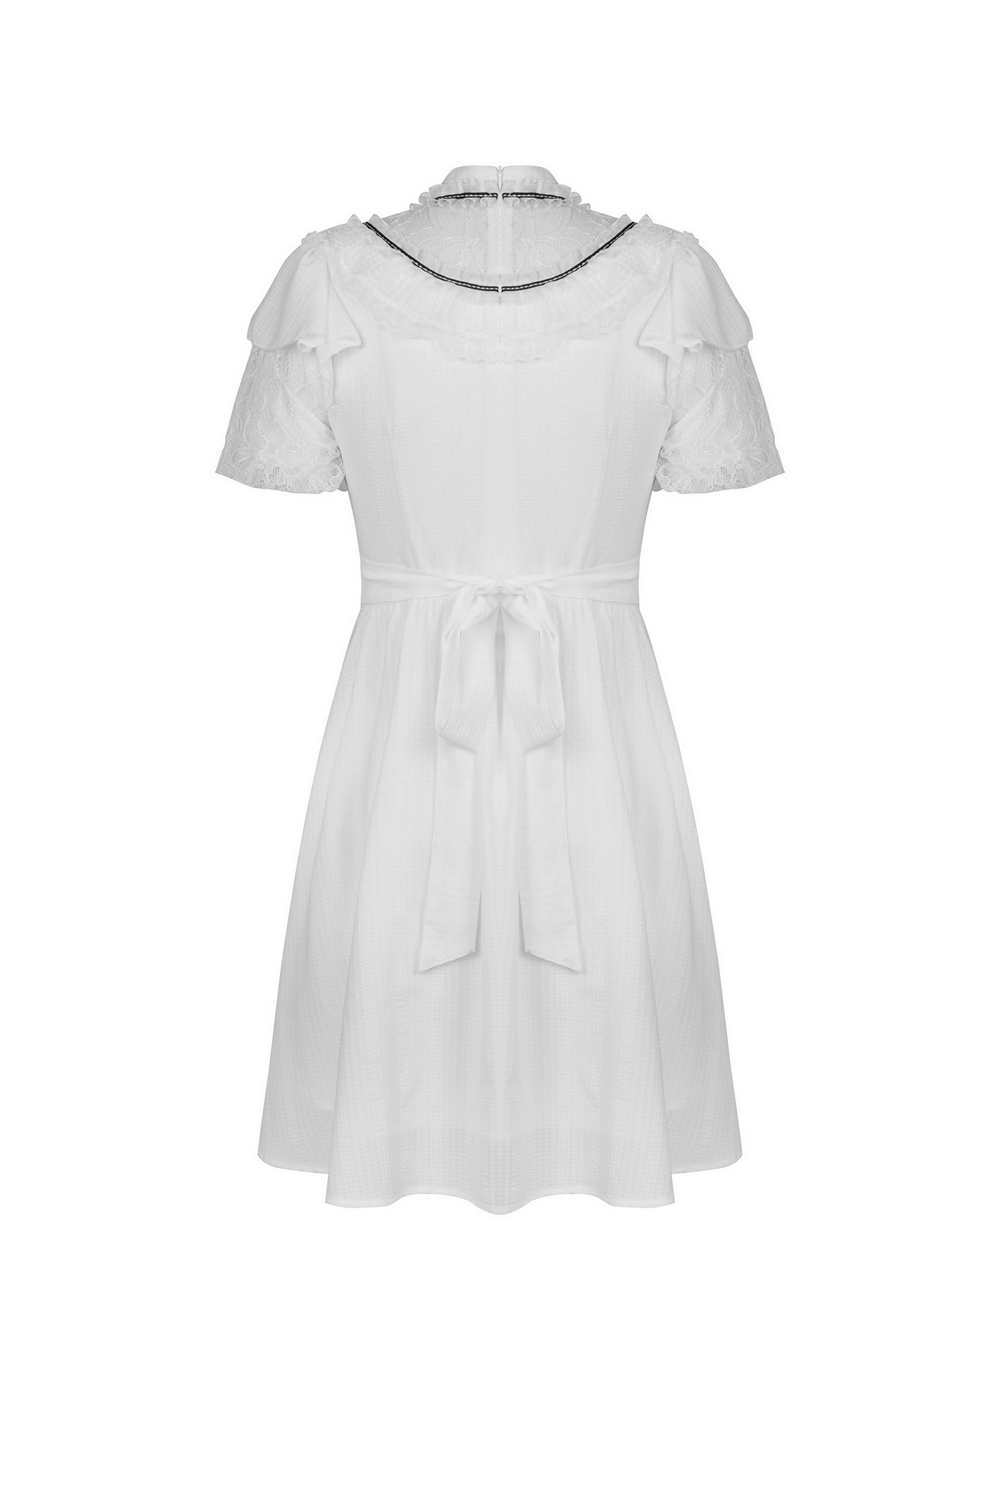 Chic Short Puff Sleeves Lace-Trimmed White Dress